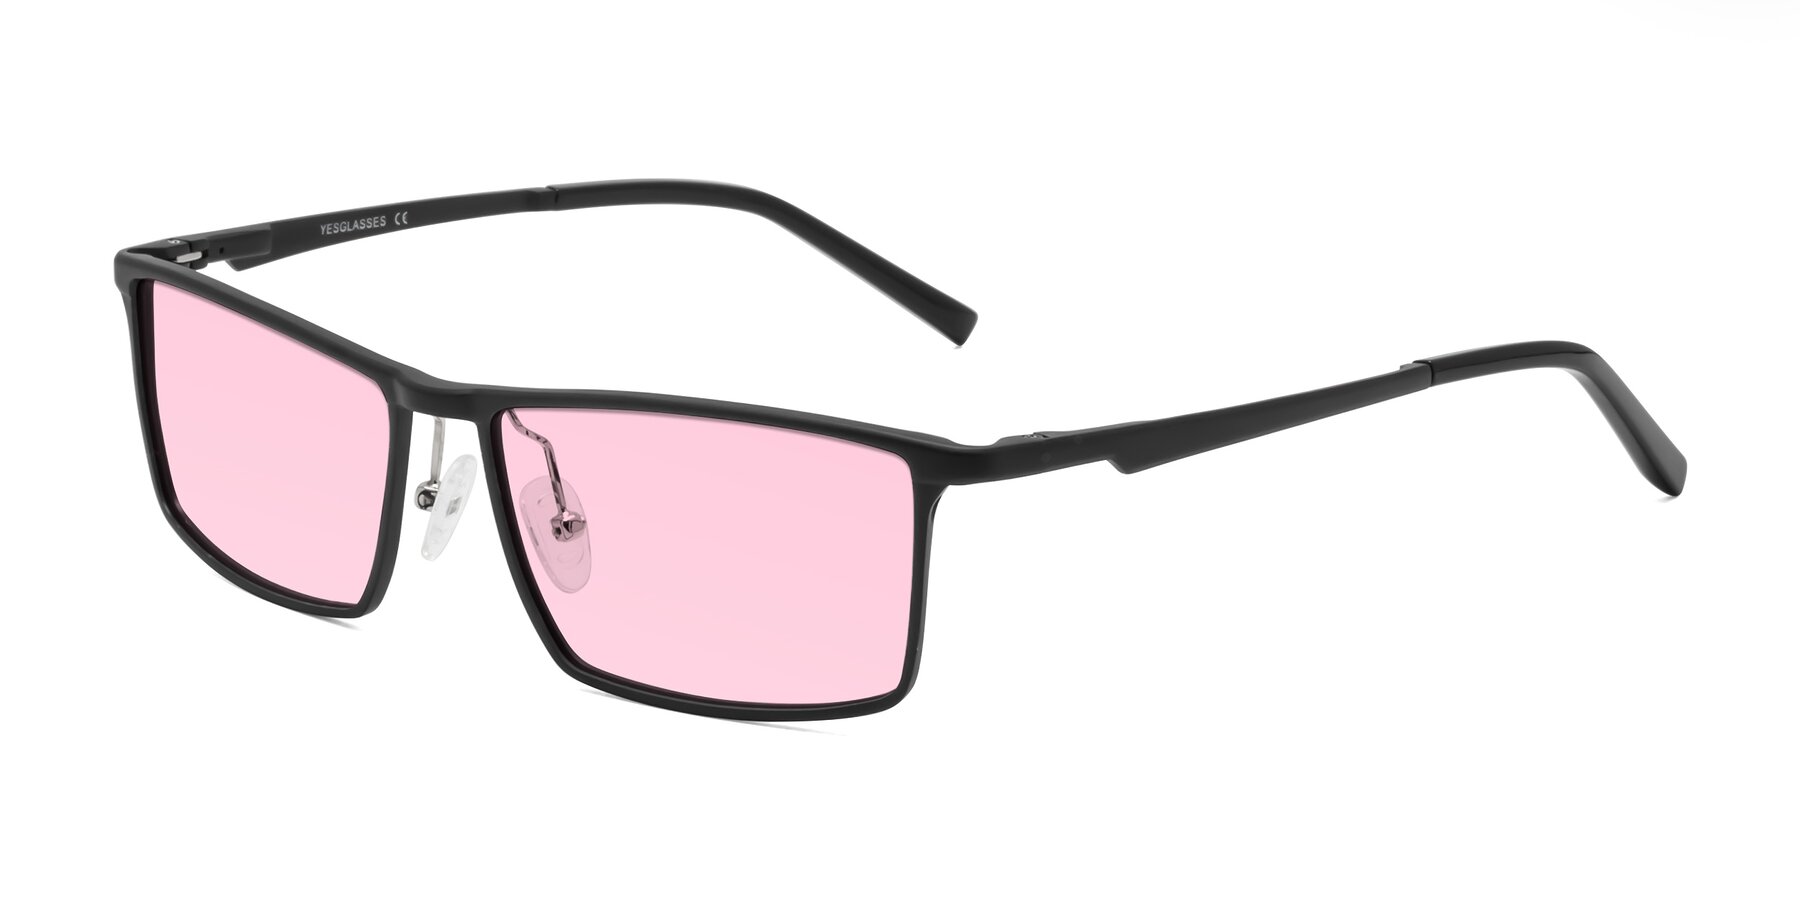 Angle of CX6330 in Black with Light Pink Tinted Lenses